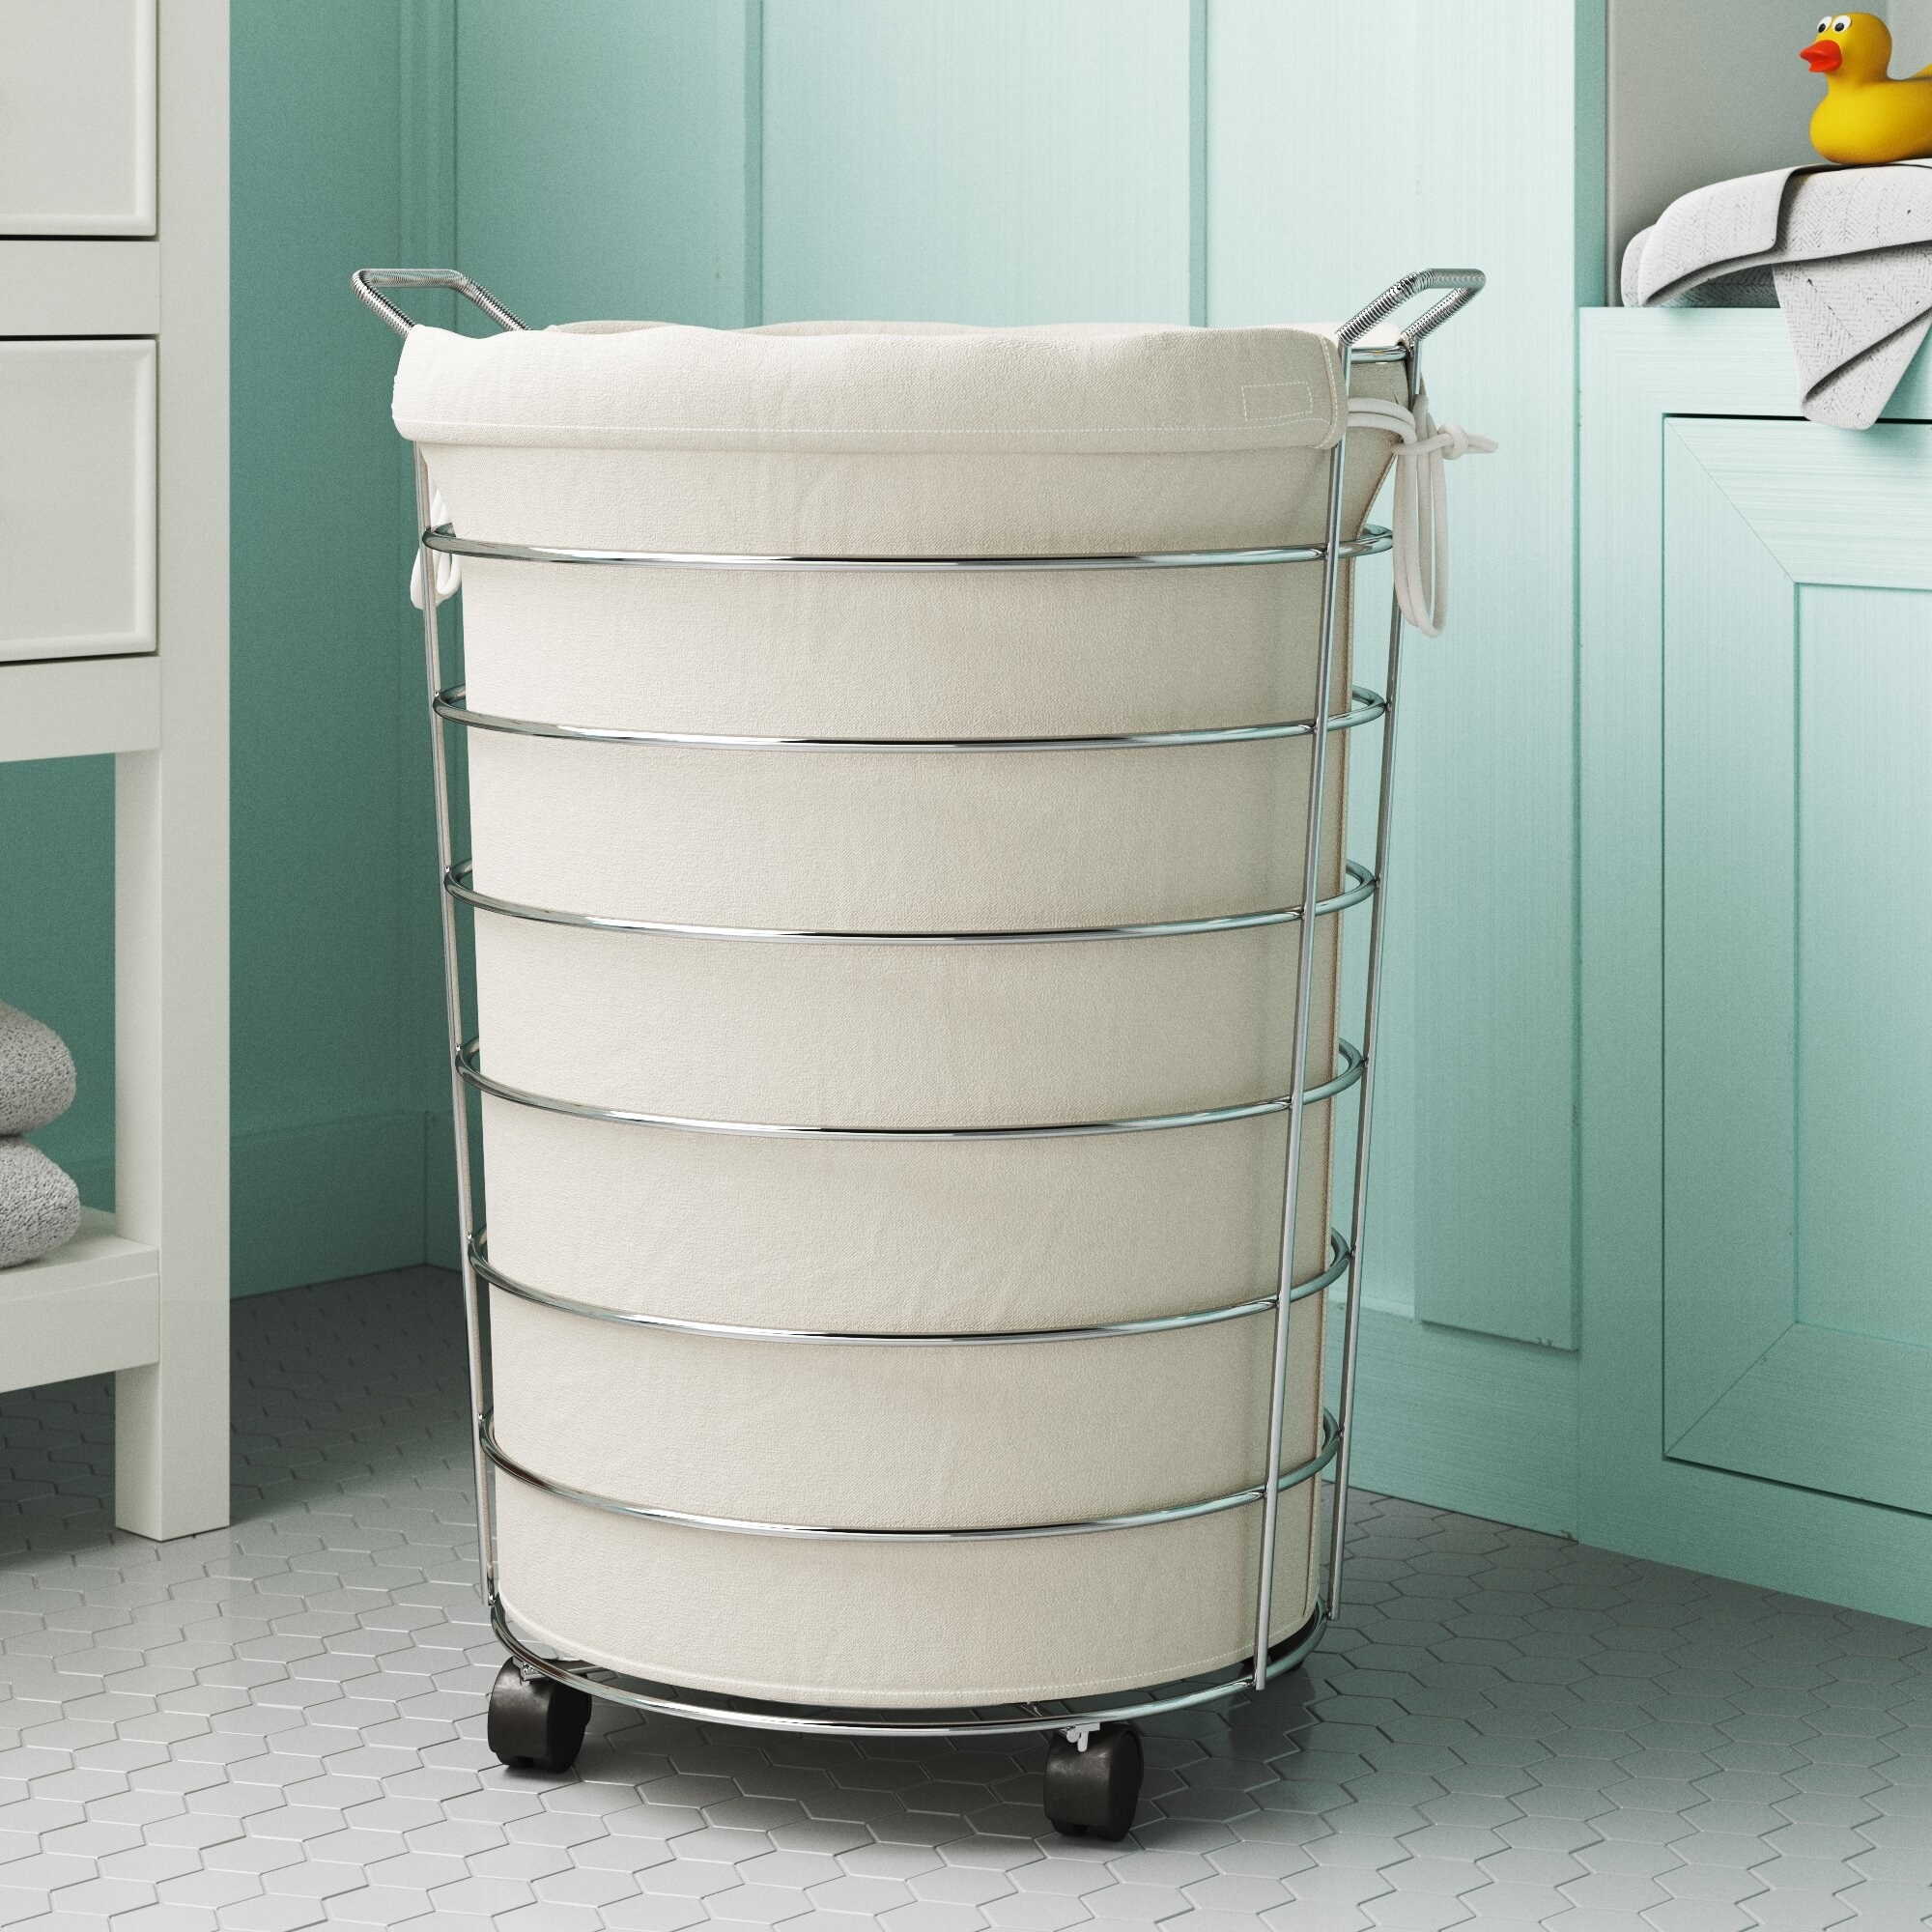 The rolling laundry hamper in a bathroom